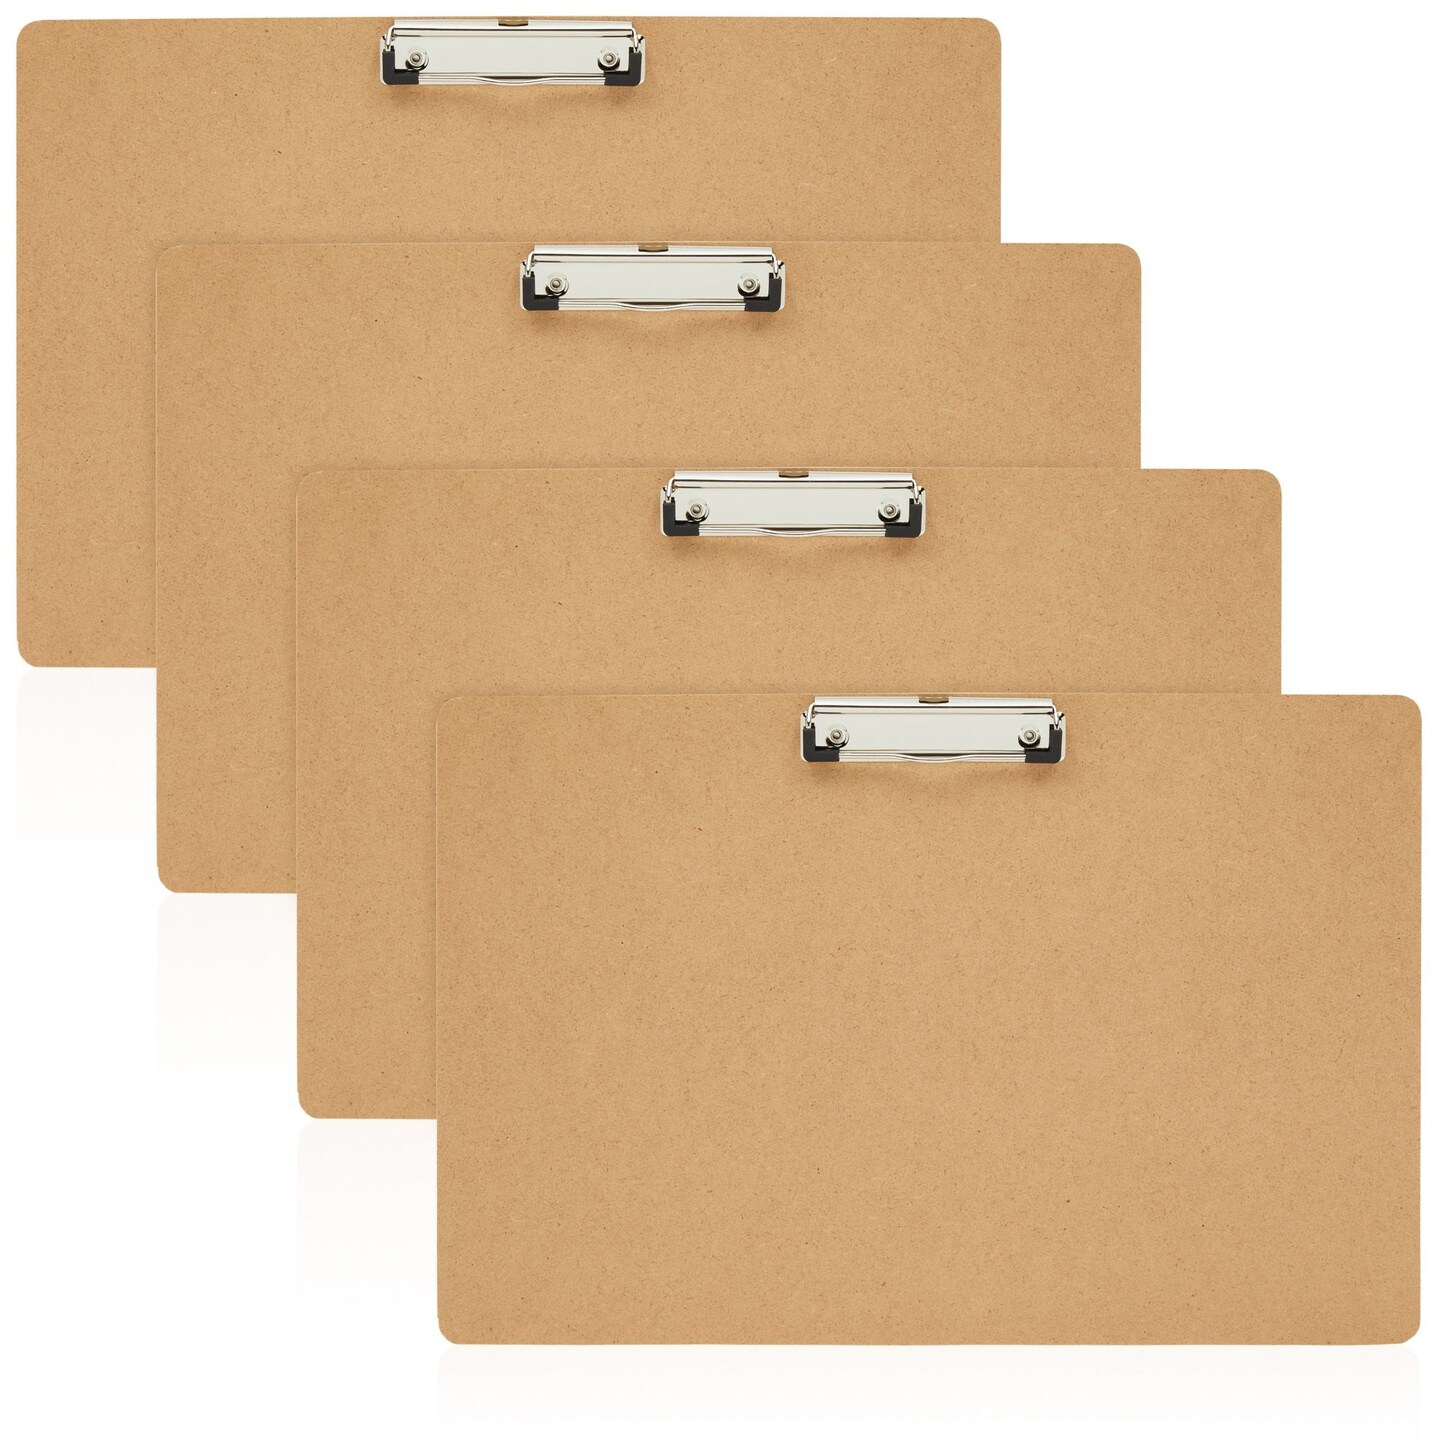 Amazon.com : 11x17 Clipboard Landscape with Hardware Corner Guard Extra  Large Clipboard Hardboard with 8 Inch Jumbo Lever Clip Clipboards 11x17 Log  Color 2 Pack : Office Products